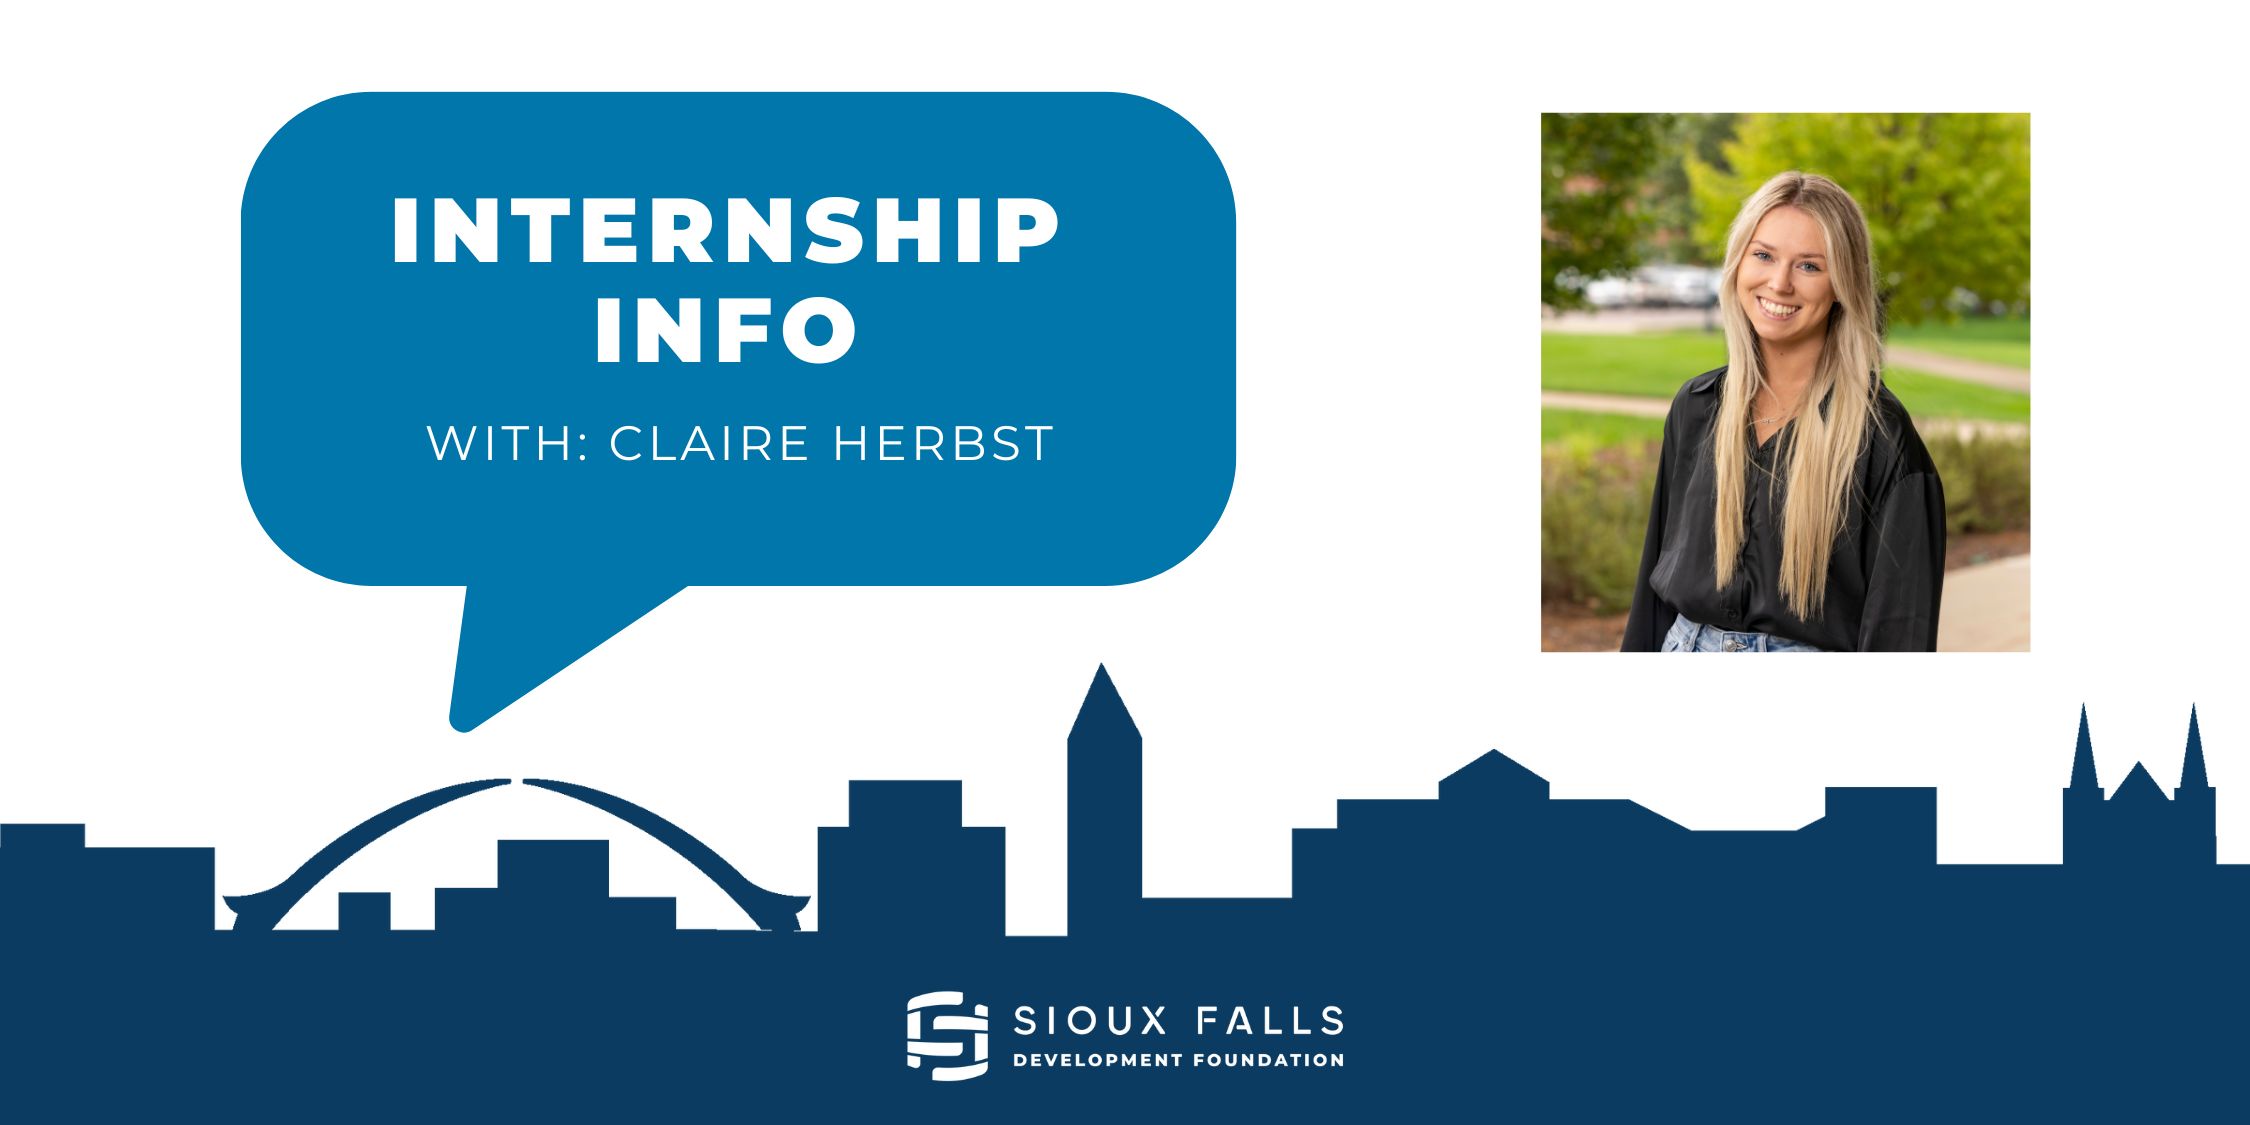 Introducing: Internship Info with Claire Herbst of the Sioux Falls Development Foundation